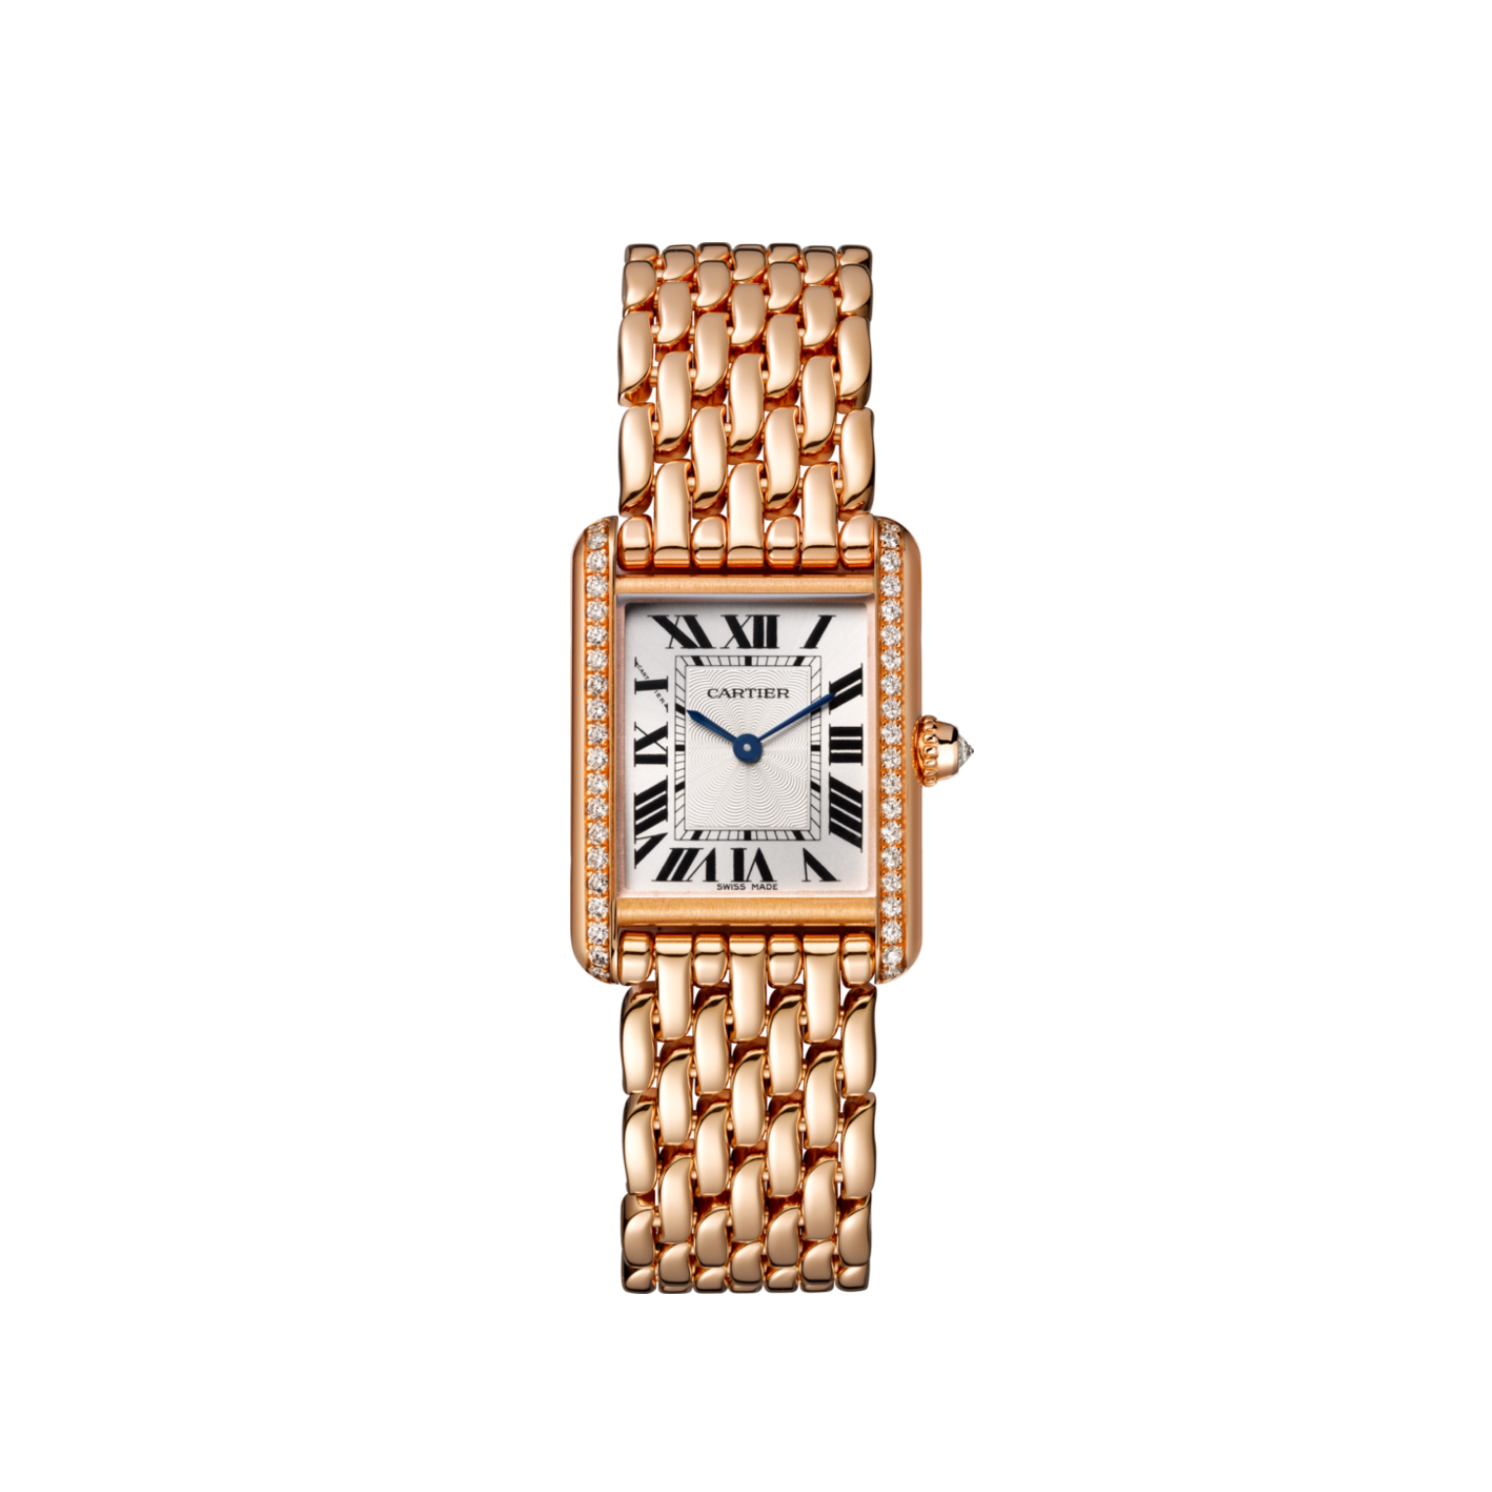 Picture of TANK LOUISE CARTIER - PINK GOLD HAND-WOUND SMALL